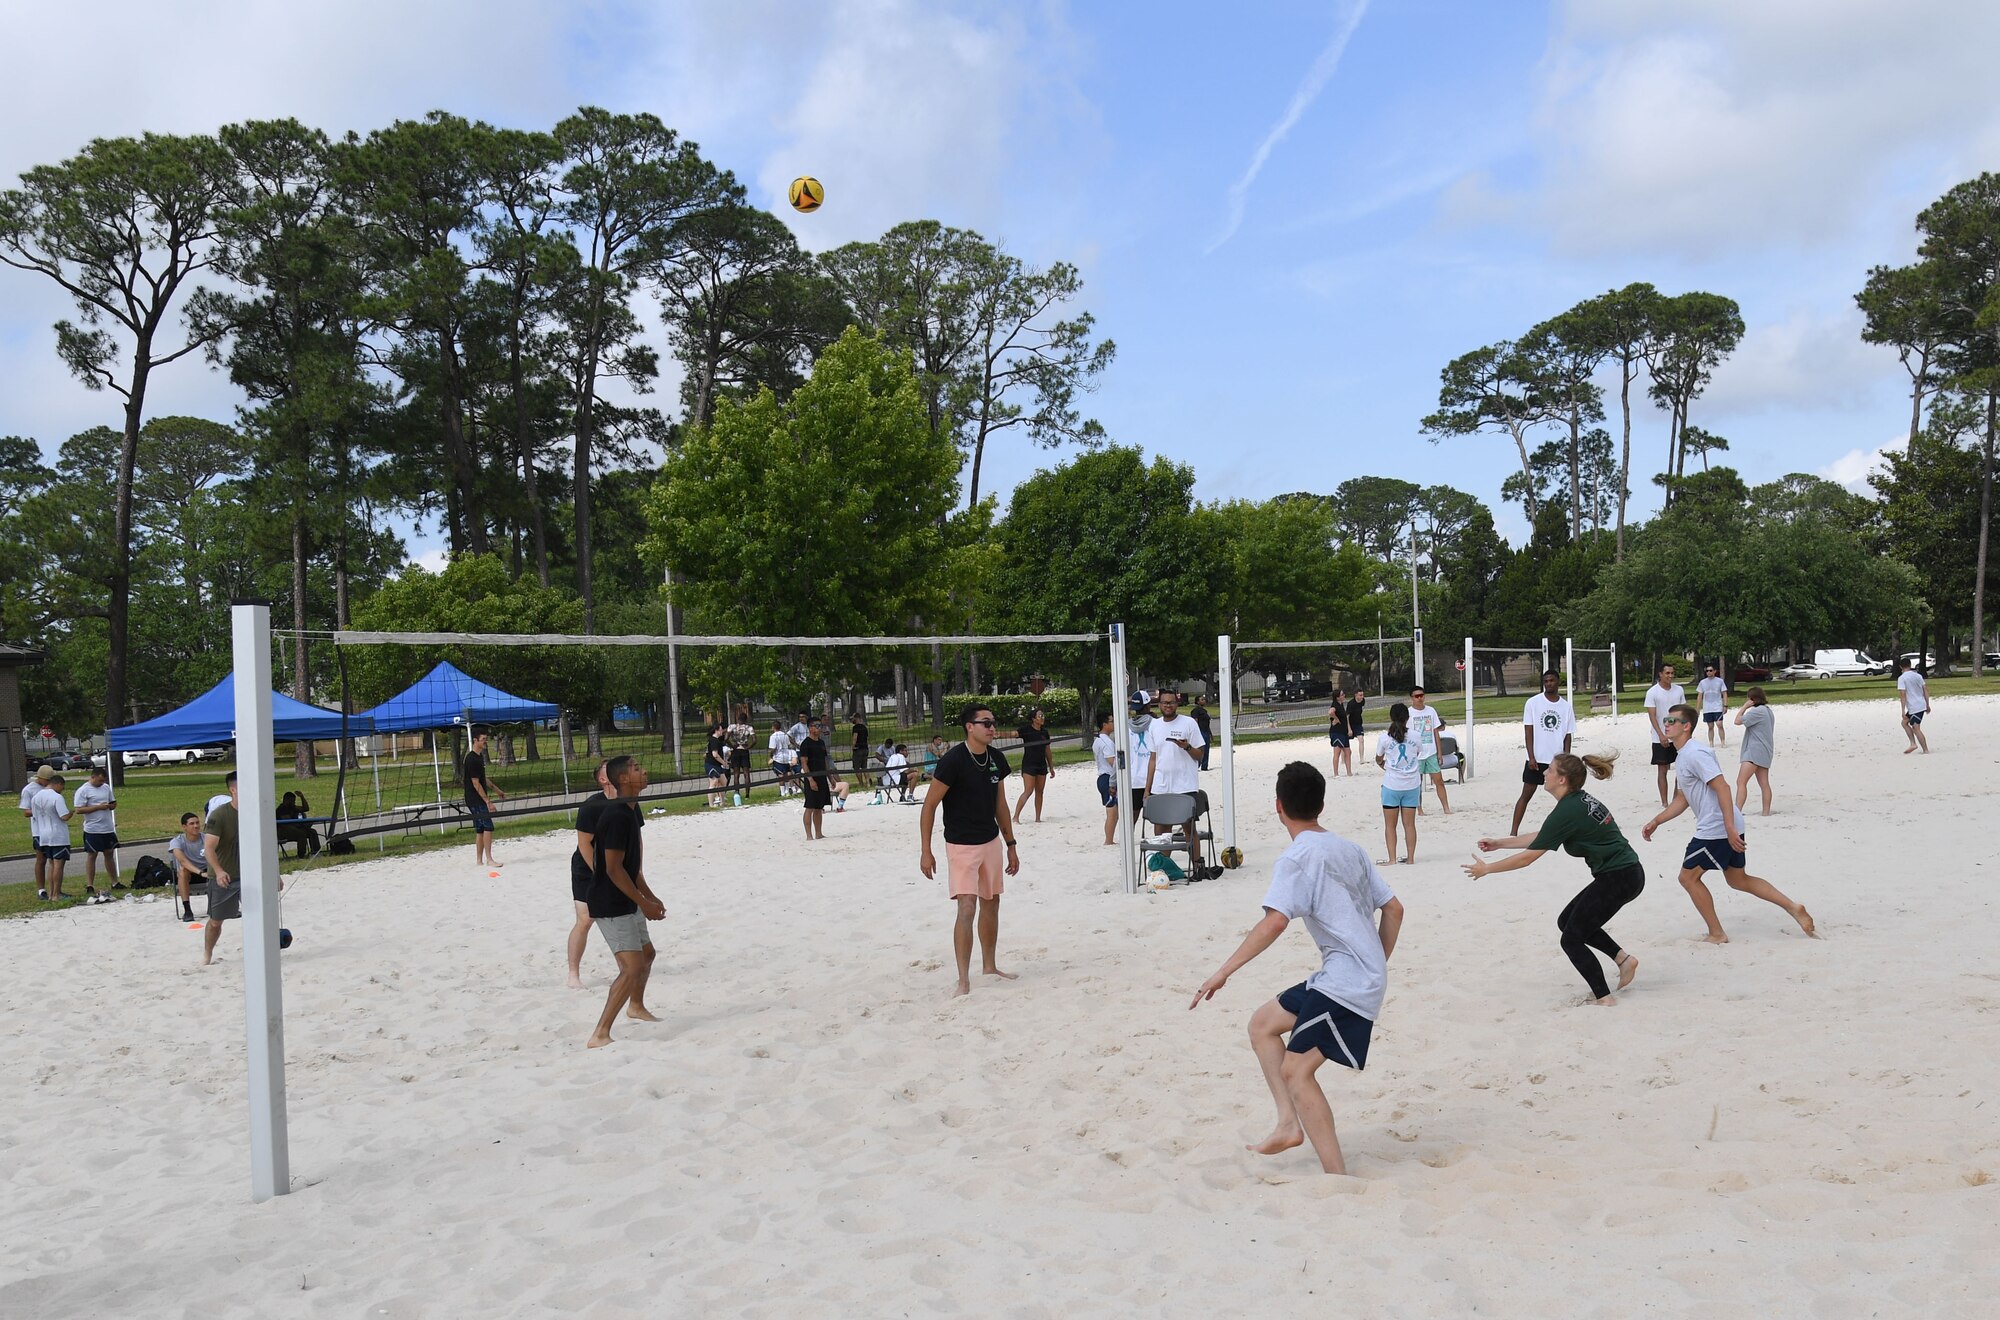 Keesler personnel participate in the Sexual Assault and Awareness Prevention Month volleyball tournament at Keesler Air Force Base, Mississippi, April 29, 2022. More than 20 teams competed in the event, which was held in acknowledgment of Sexual Assault and Awareness Prevention Month throughout April. (U.S. Air Force photo by Kemberly Groue)